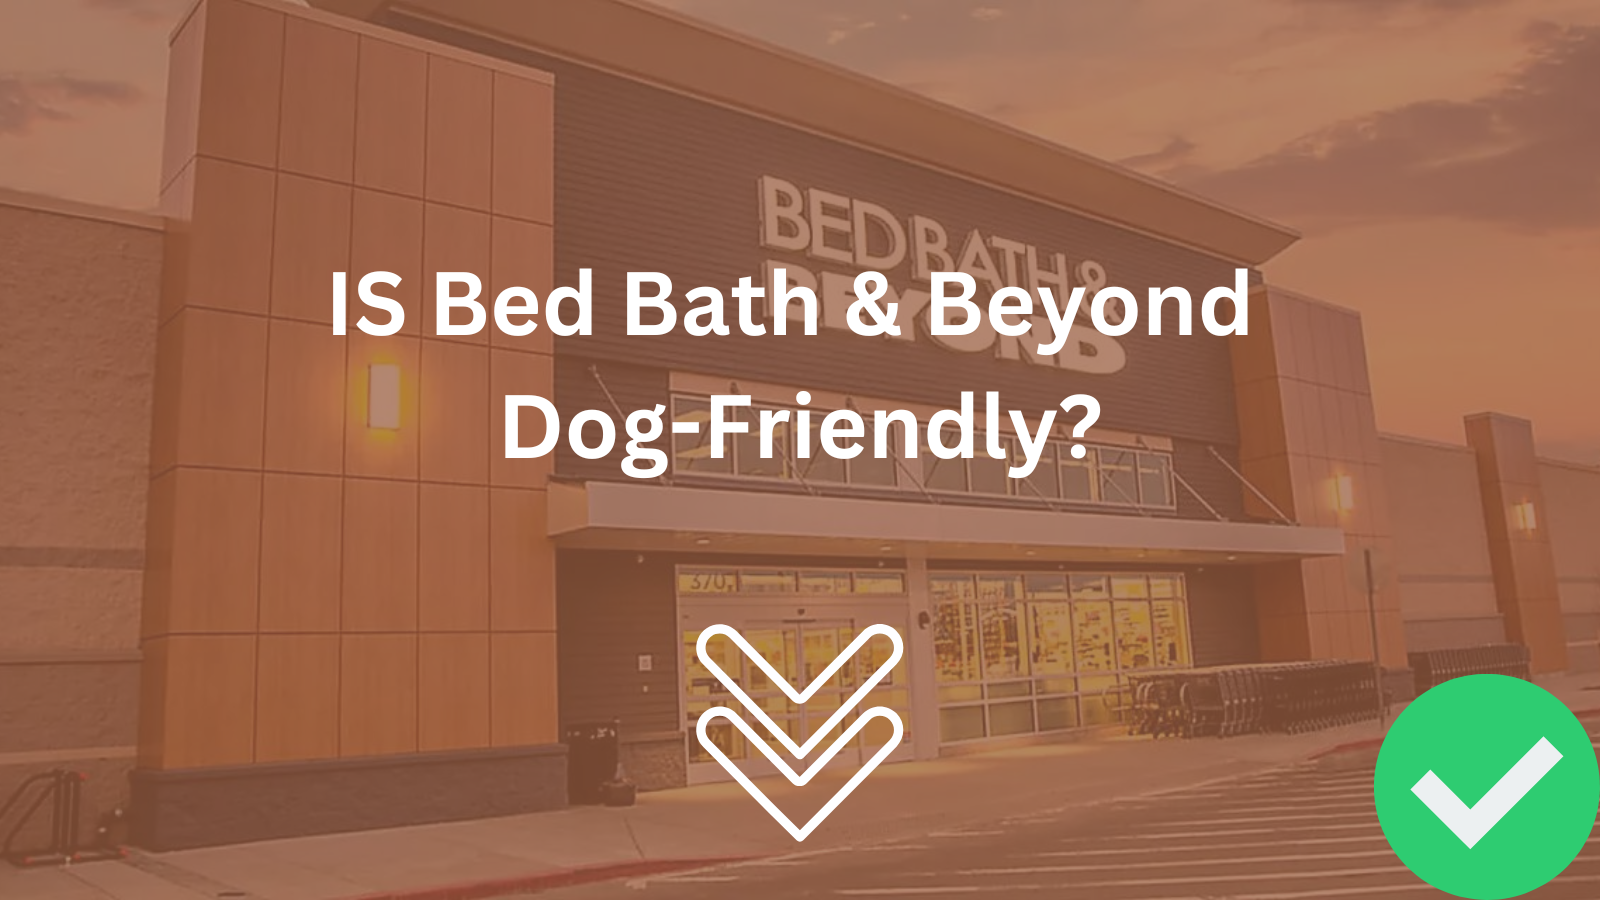 Image Text: "Is Bed Bath & Beyond Dog-Friendly?"